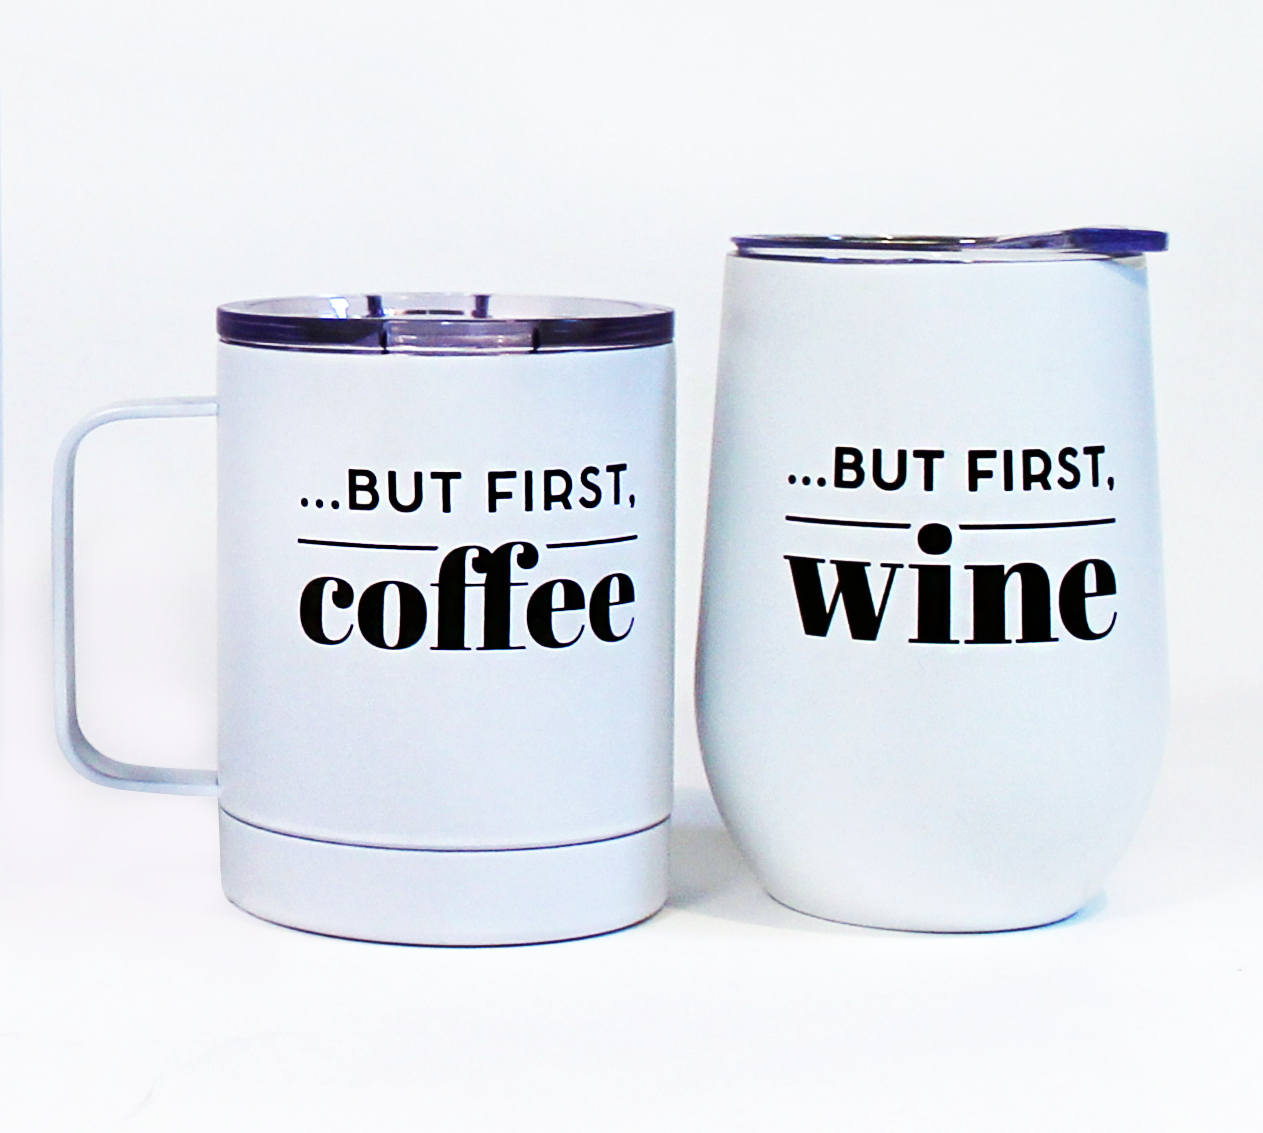 https://www.wildeyedesigns.com/wp-content/uploads/2021/07/DMS_Collection-ButFirstCoffee.png